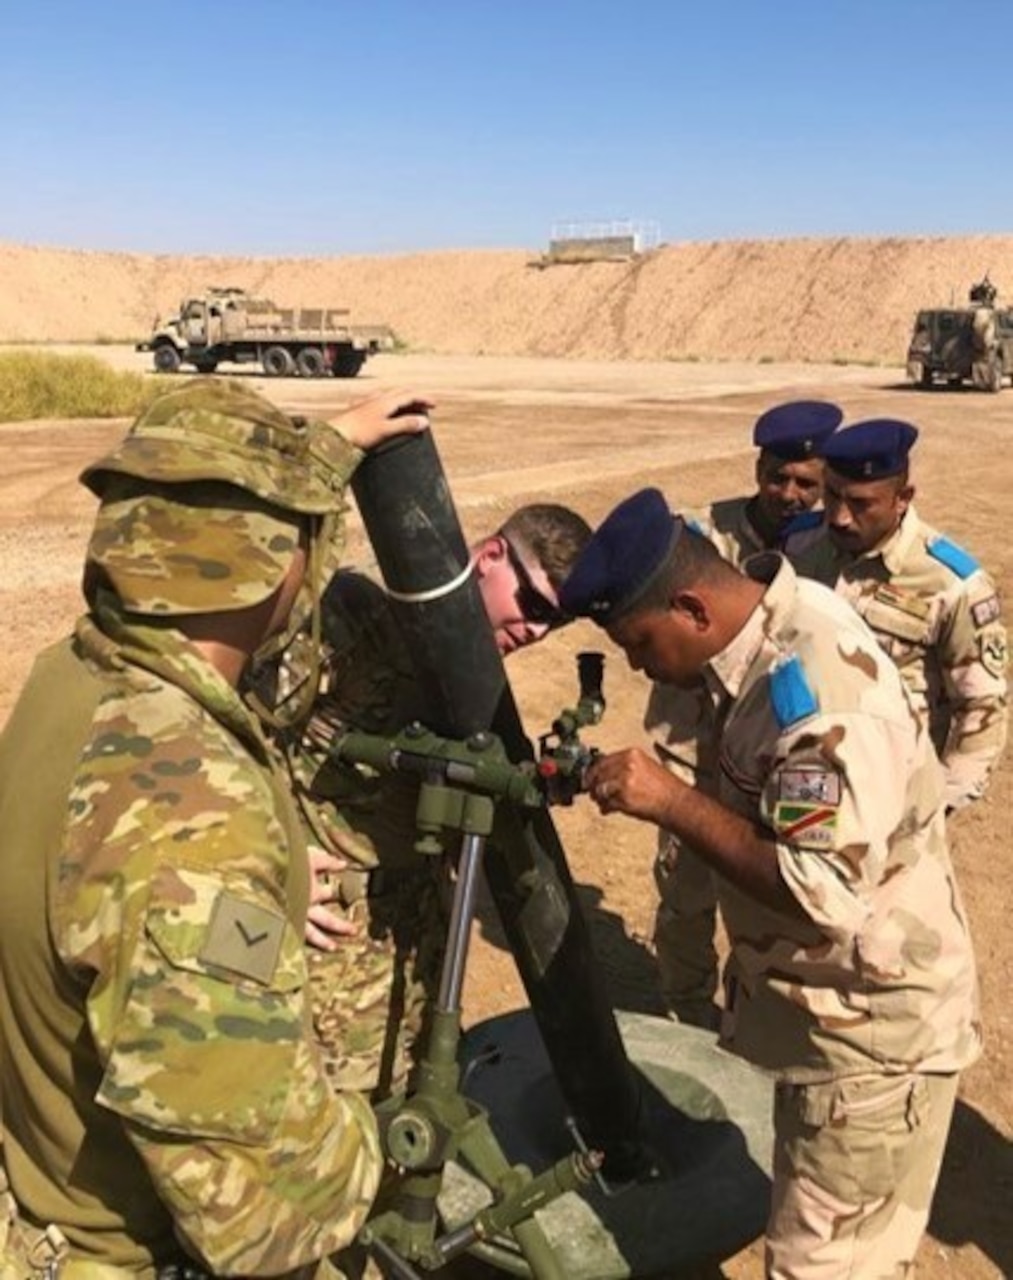 U.S. and Australian army instructors show an Iraqi soldier an M120 mortar system.